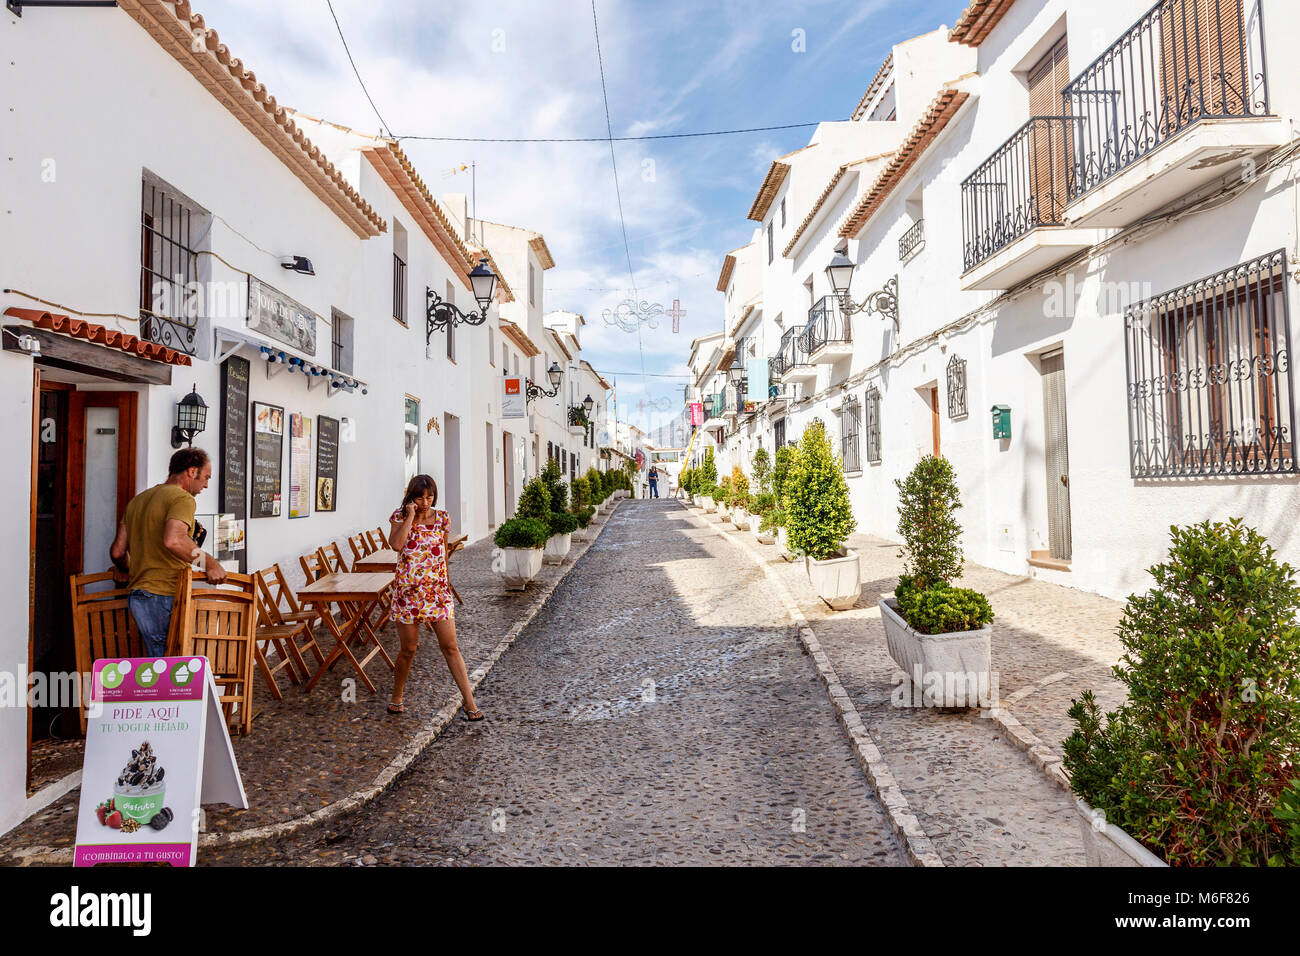 Altea in Spain, one of the most beautiful towns along the Costa Blanca with  about 15 000 inhabitants .A typical street scene Stock Photo - Alamy